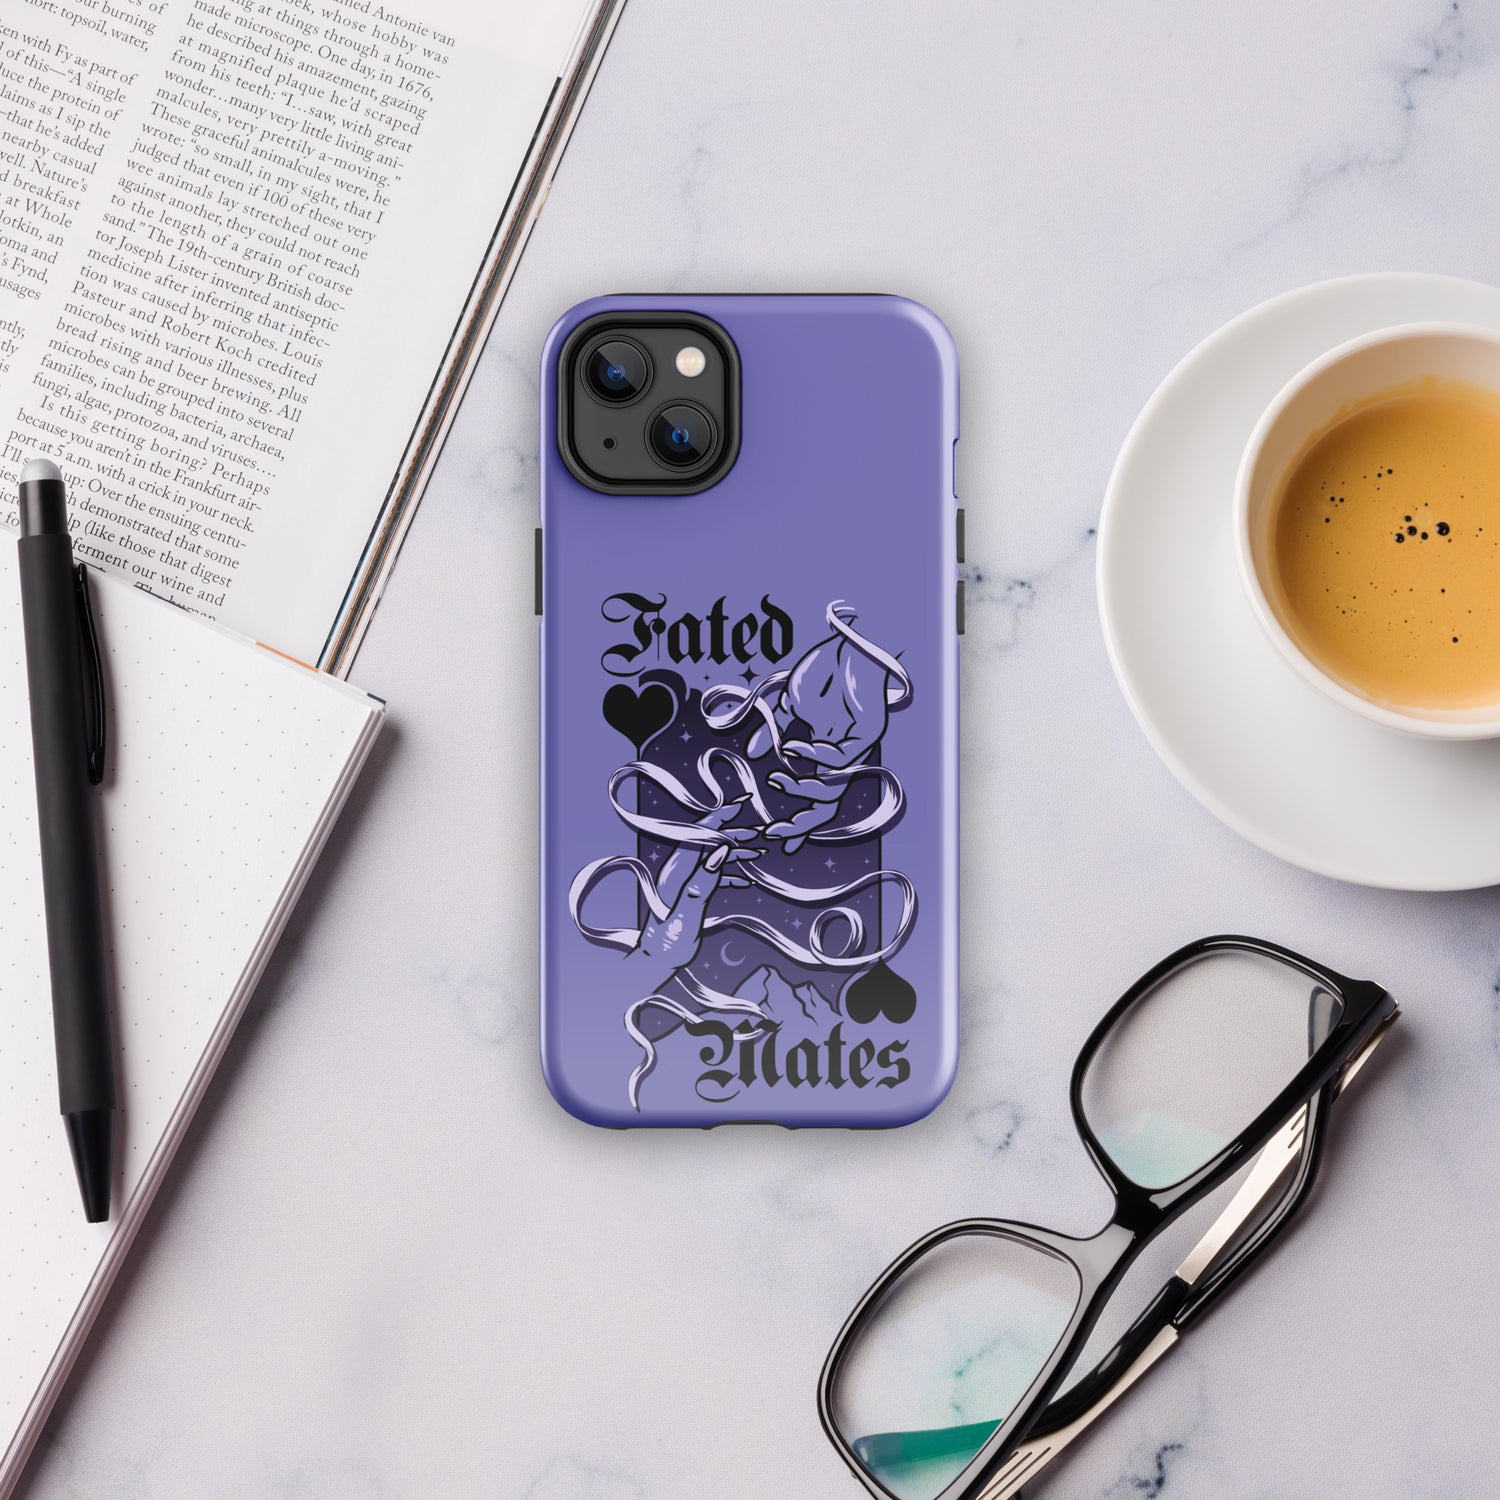 FATED MATES IPHONE CASE | TROPES MERCH